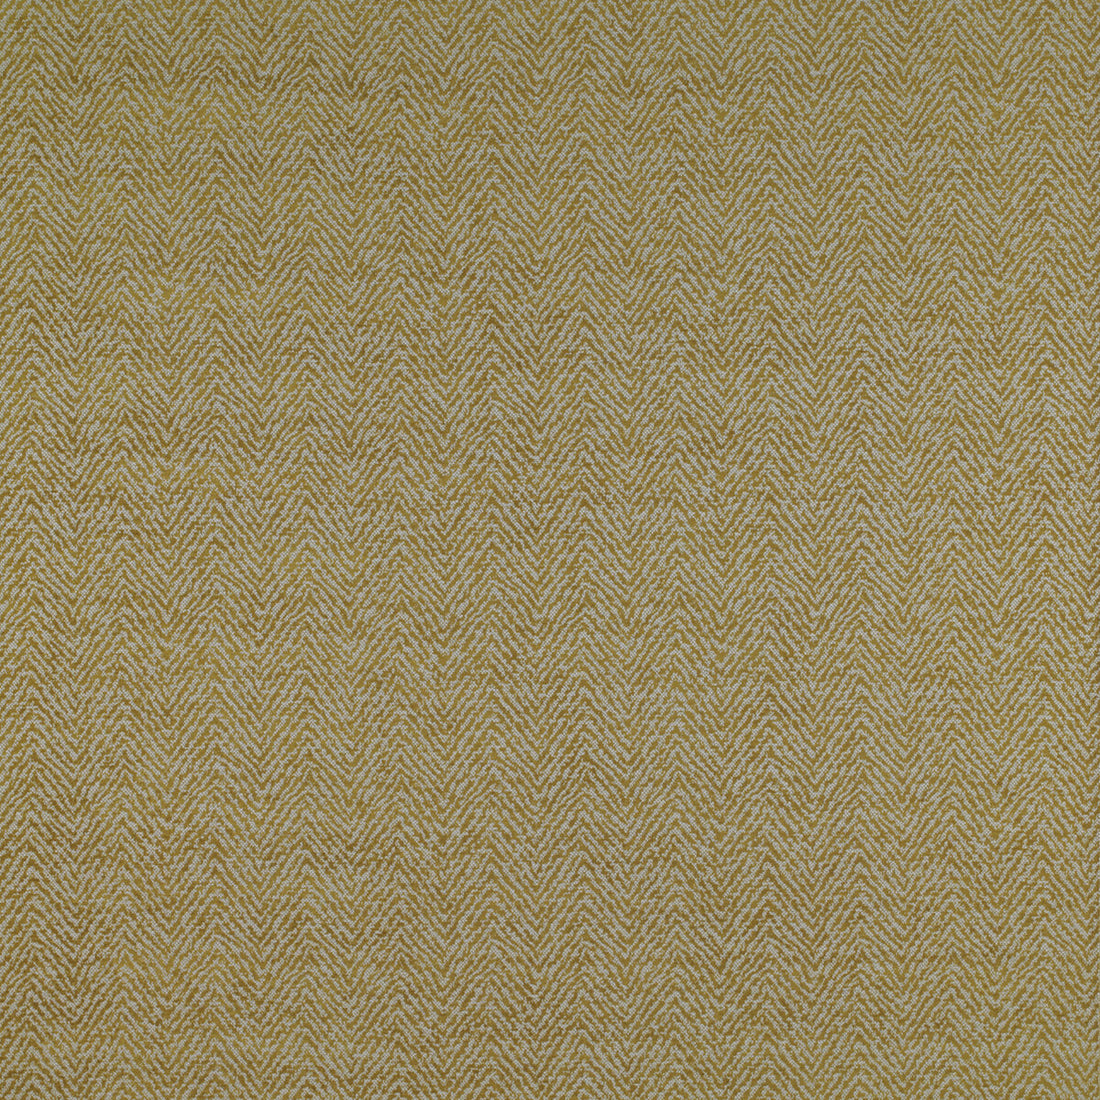 Santa Ana fabric in lima color - pattern GDT5206.001.0 - by Gaston y Daniela in the Madrid collection